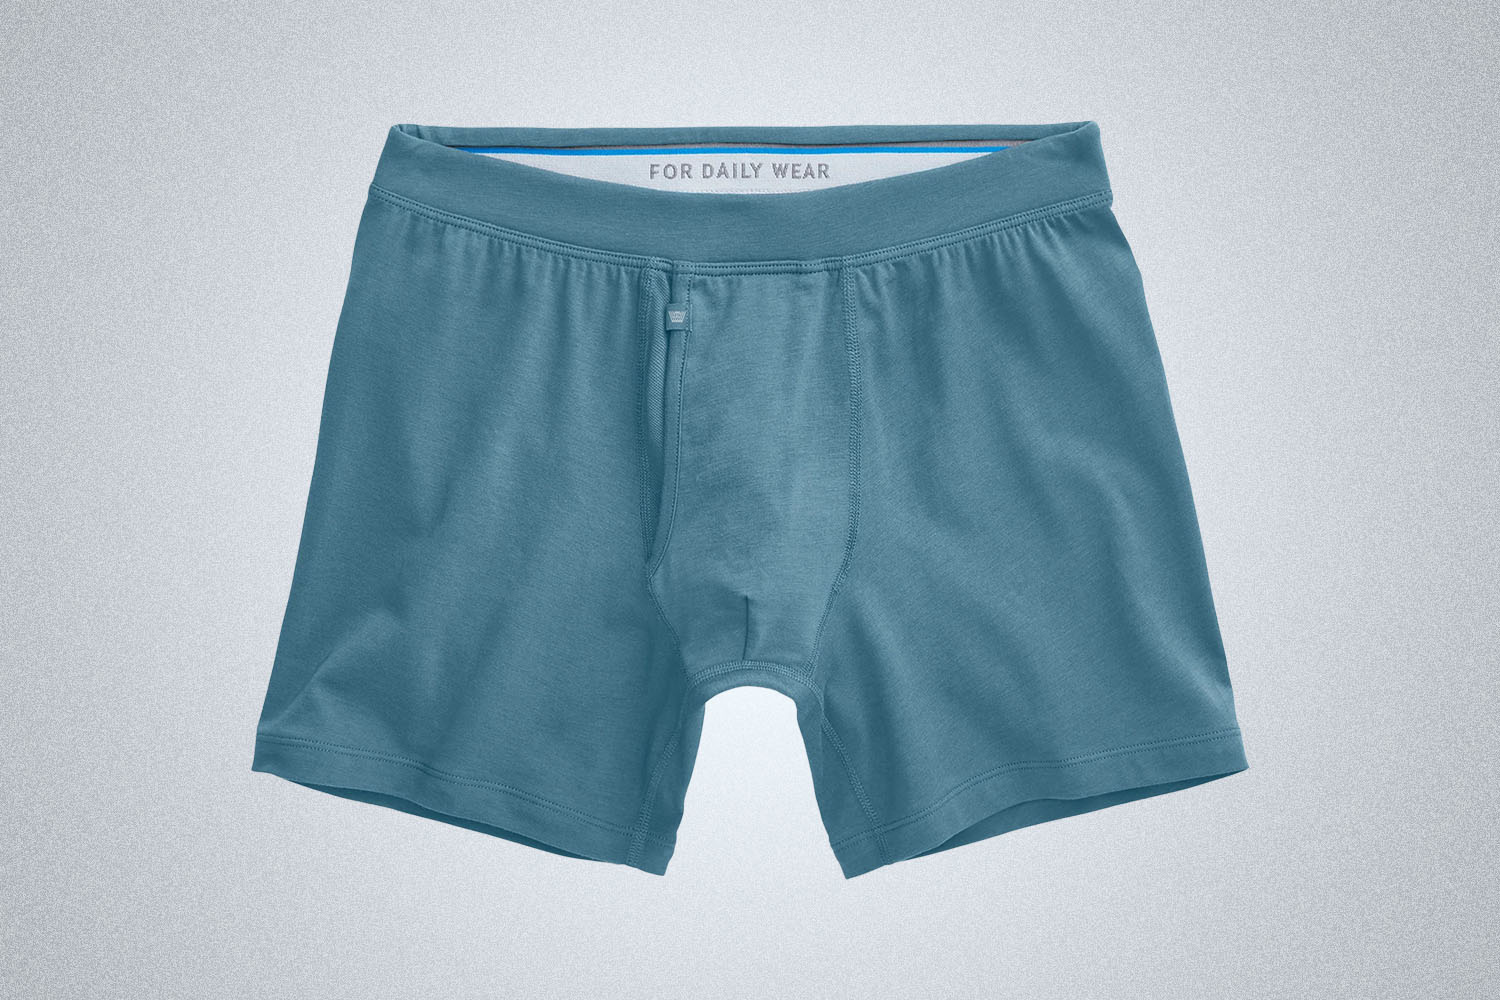 a pair of light blue boxer briefs from Mack Weldon on a grey background